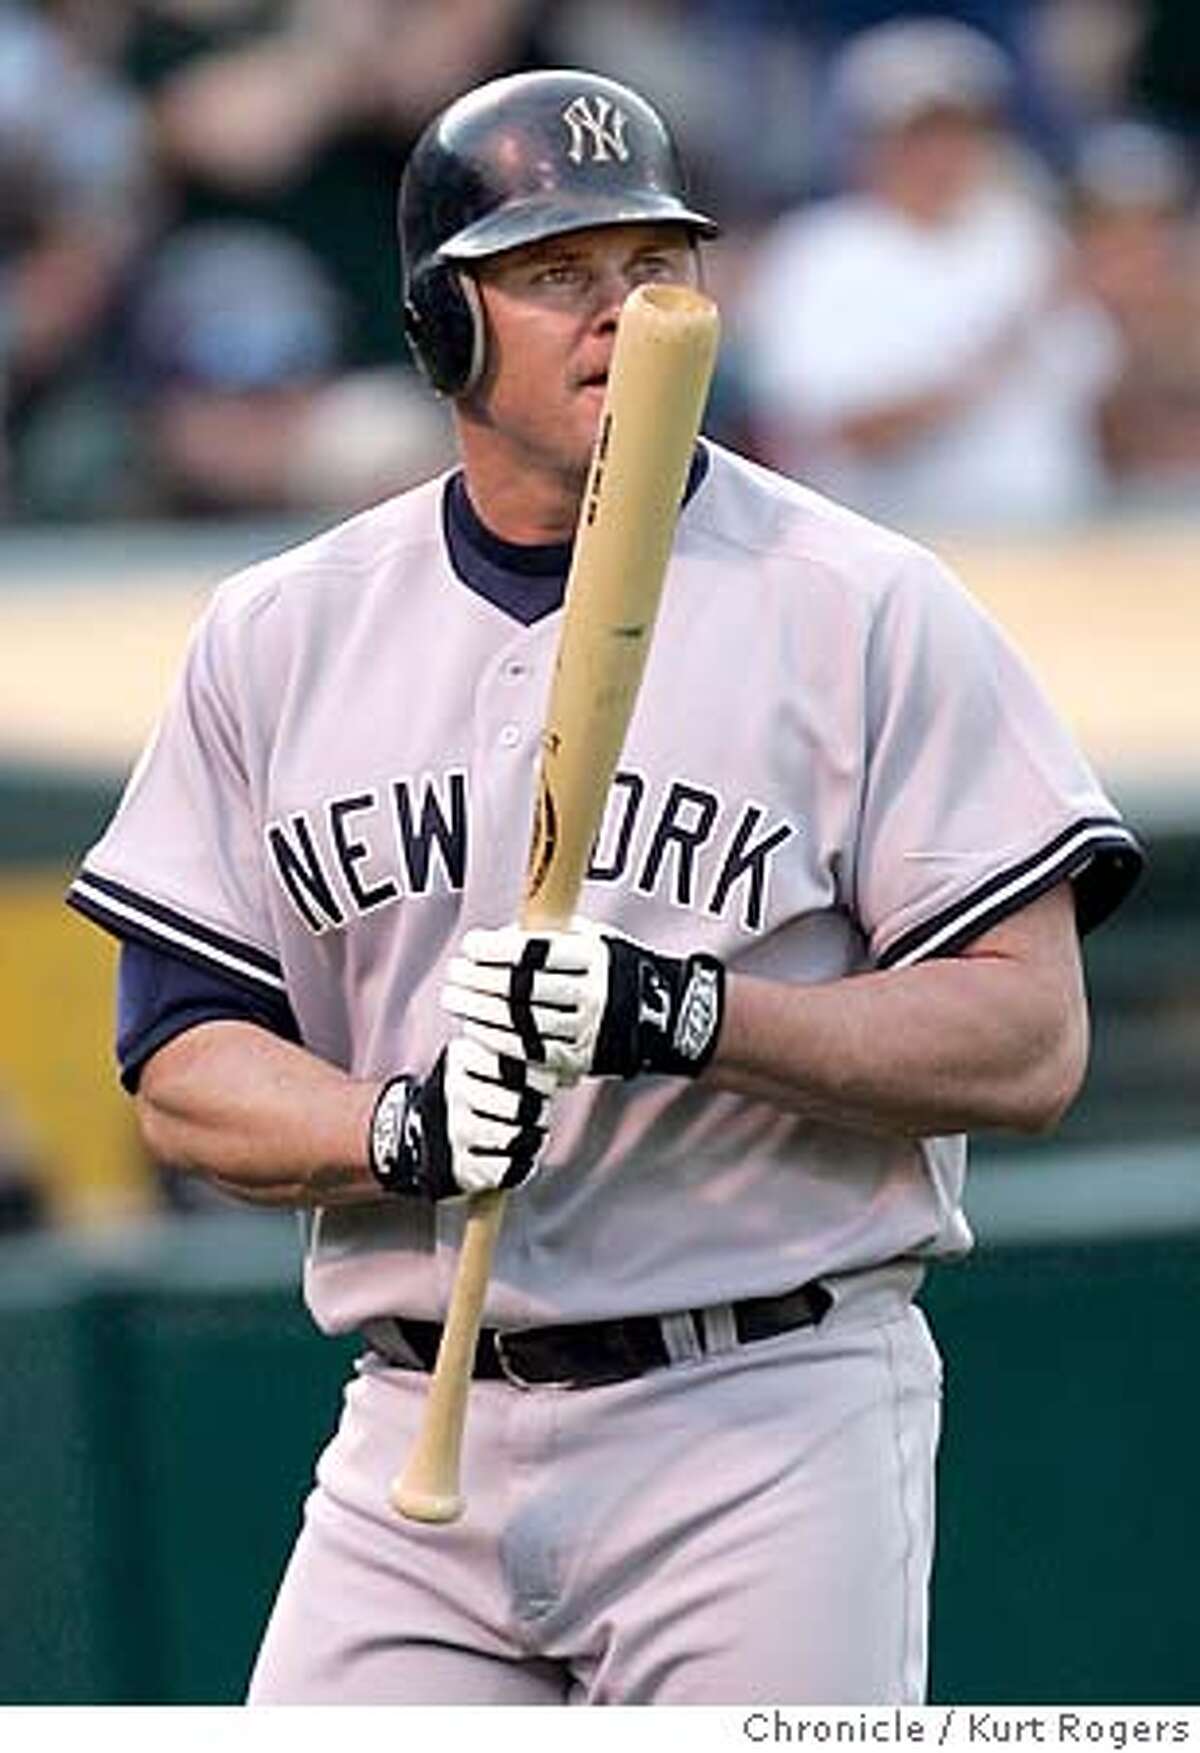 FALL FROM GRACE / Giambi struggling to put career back together